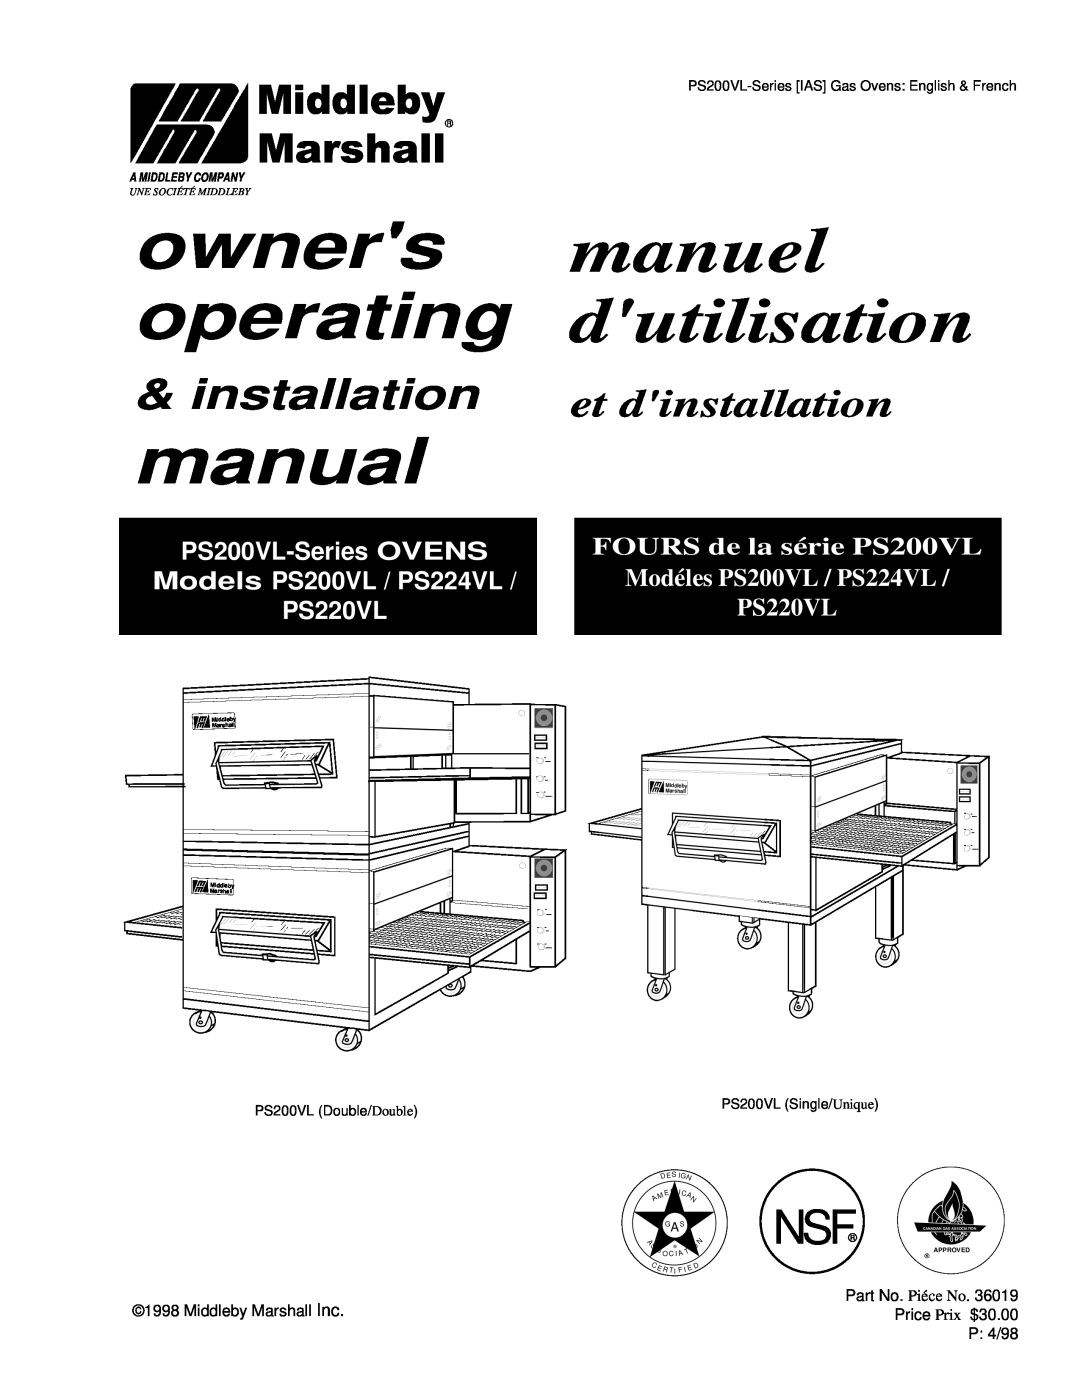 Middleby Marshall PS220VL manuel dutilisation owners, operating, manual, installation, Middleby, Marshall, E R T, Mer I Ca 